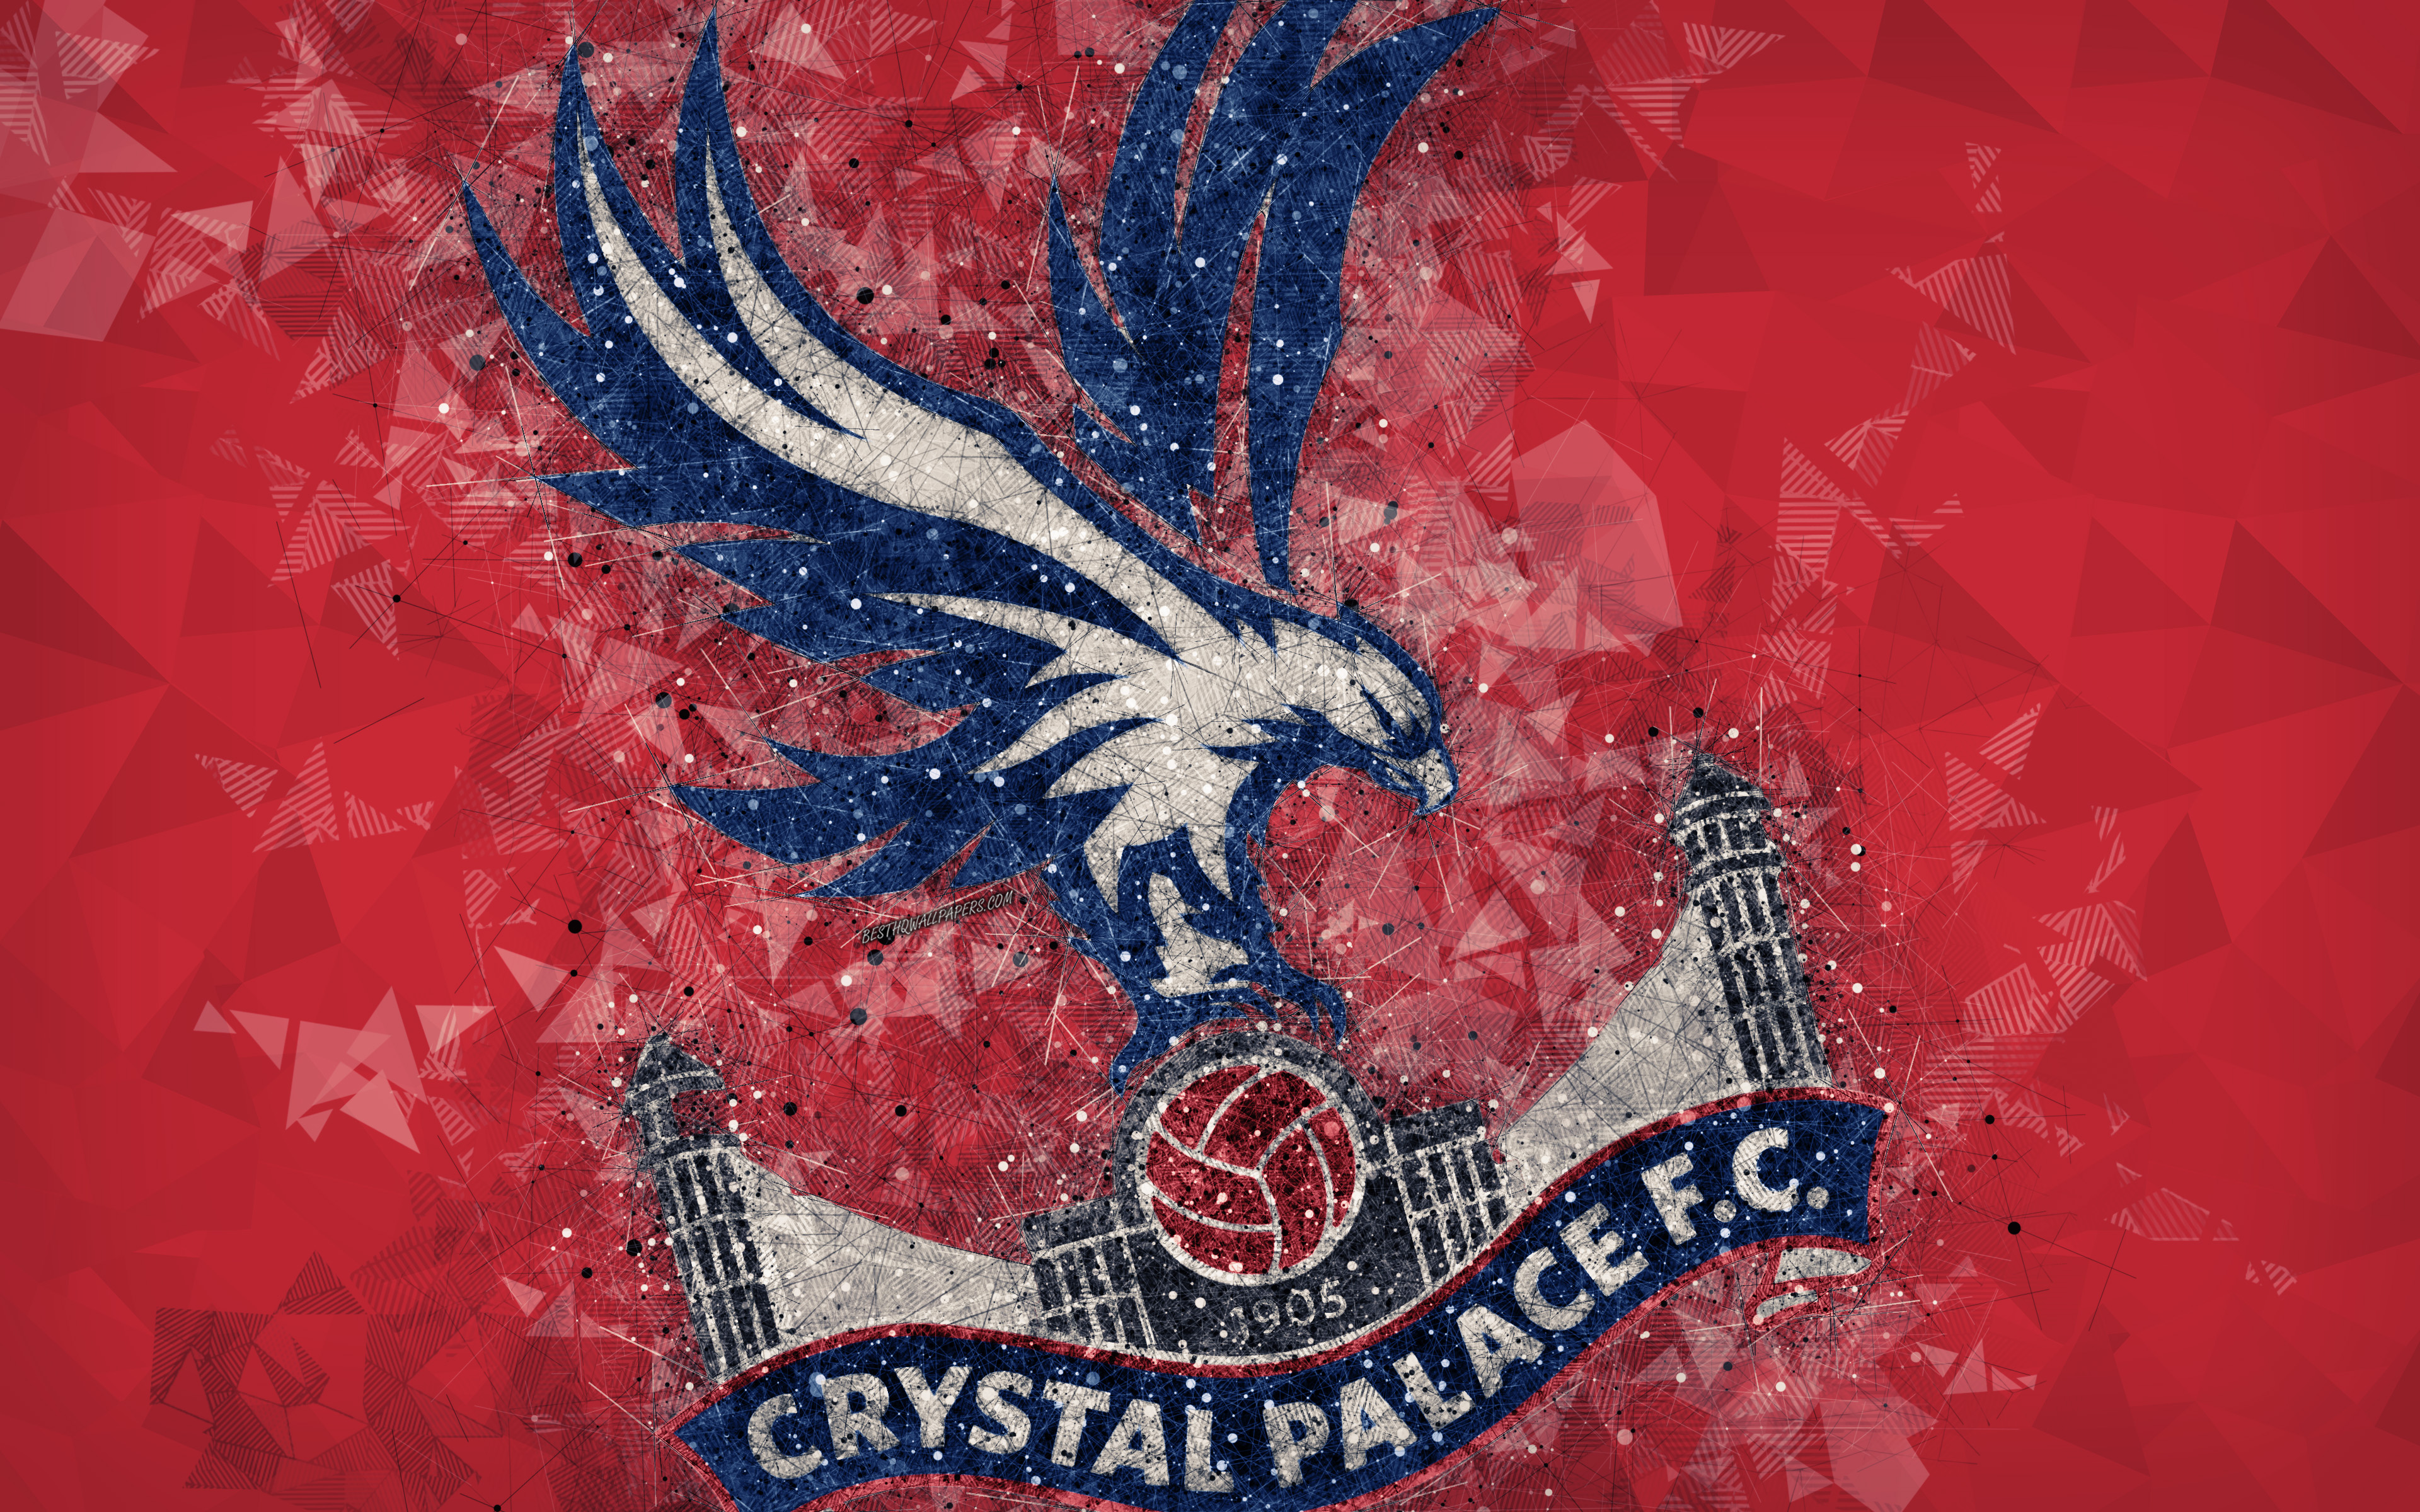 Download wallpaper Crystal Palace FC, 4k, logo, geometric art, English football club, creative emblem, red abstract background, Premier League, Croydon, London, UK, football for desktop with resolution 3840x2400. High Quality HD picture